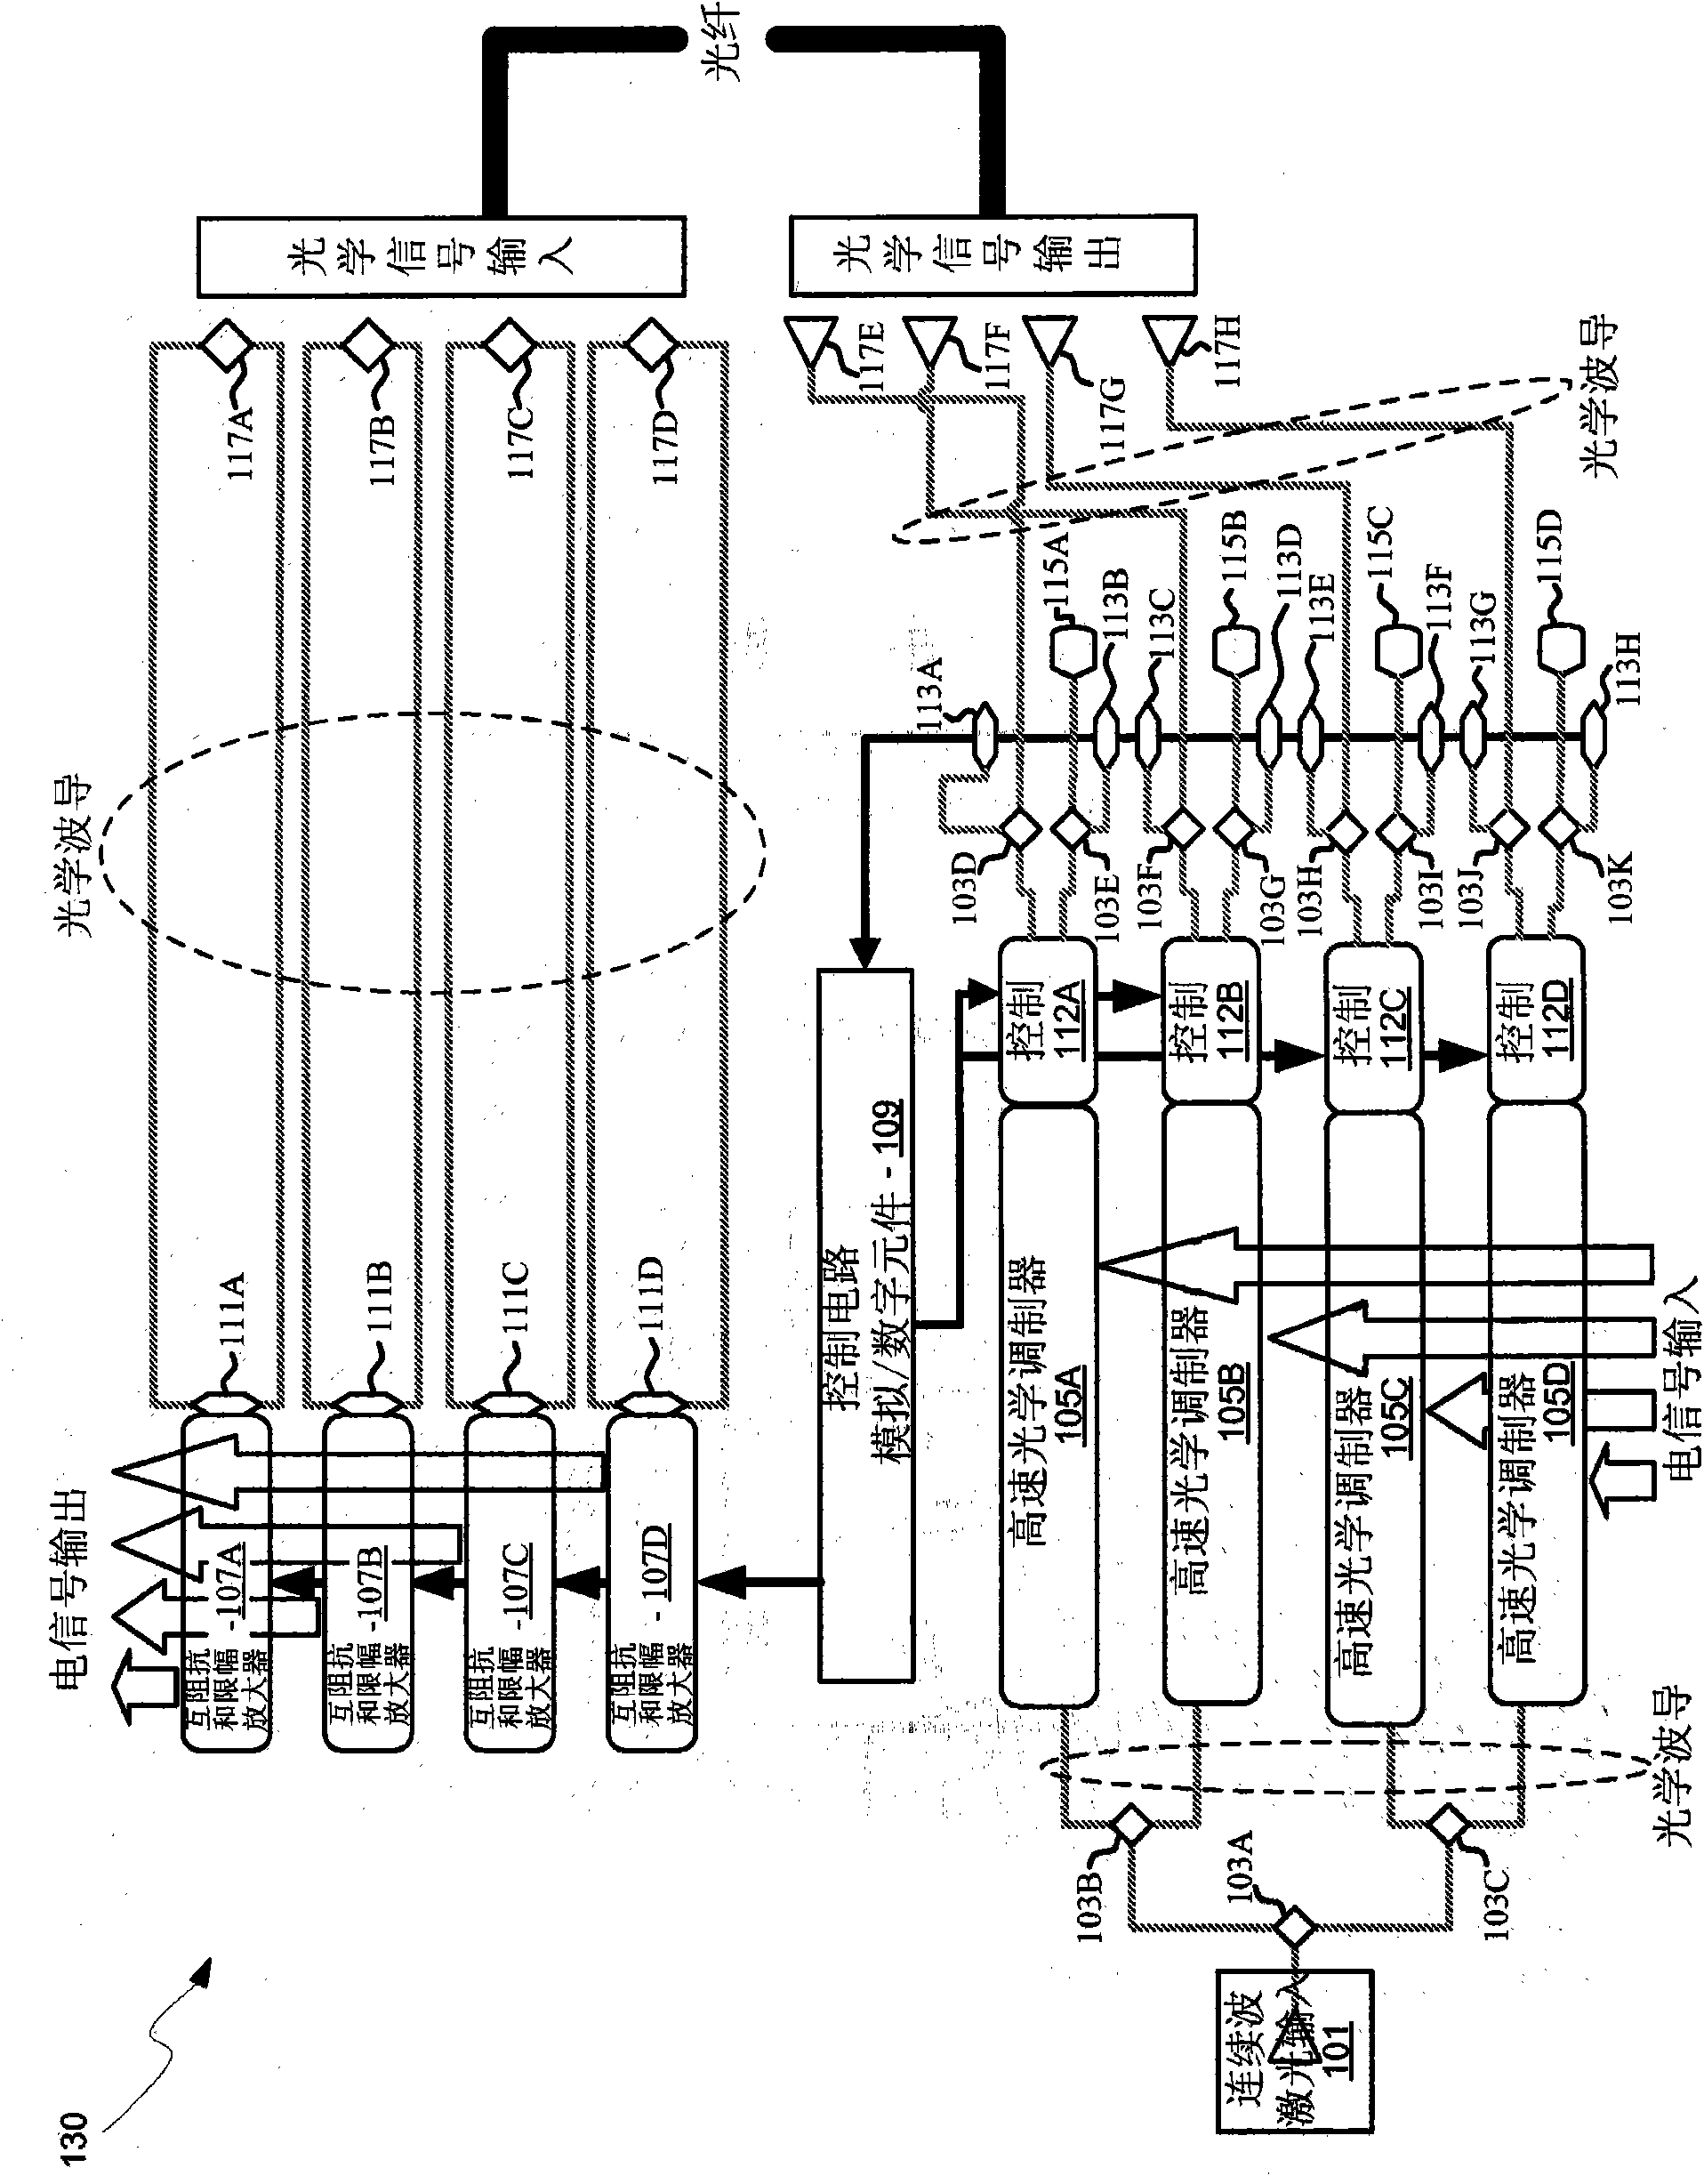 Method and system for optoelectronics transceivers integrated on a CMOS chip